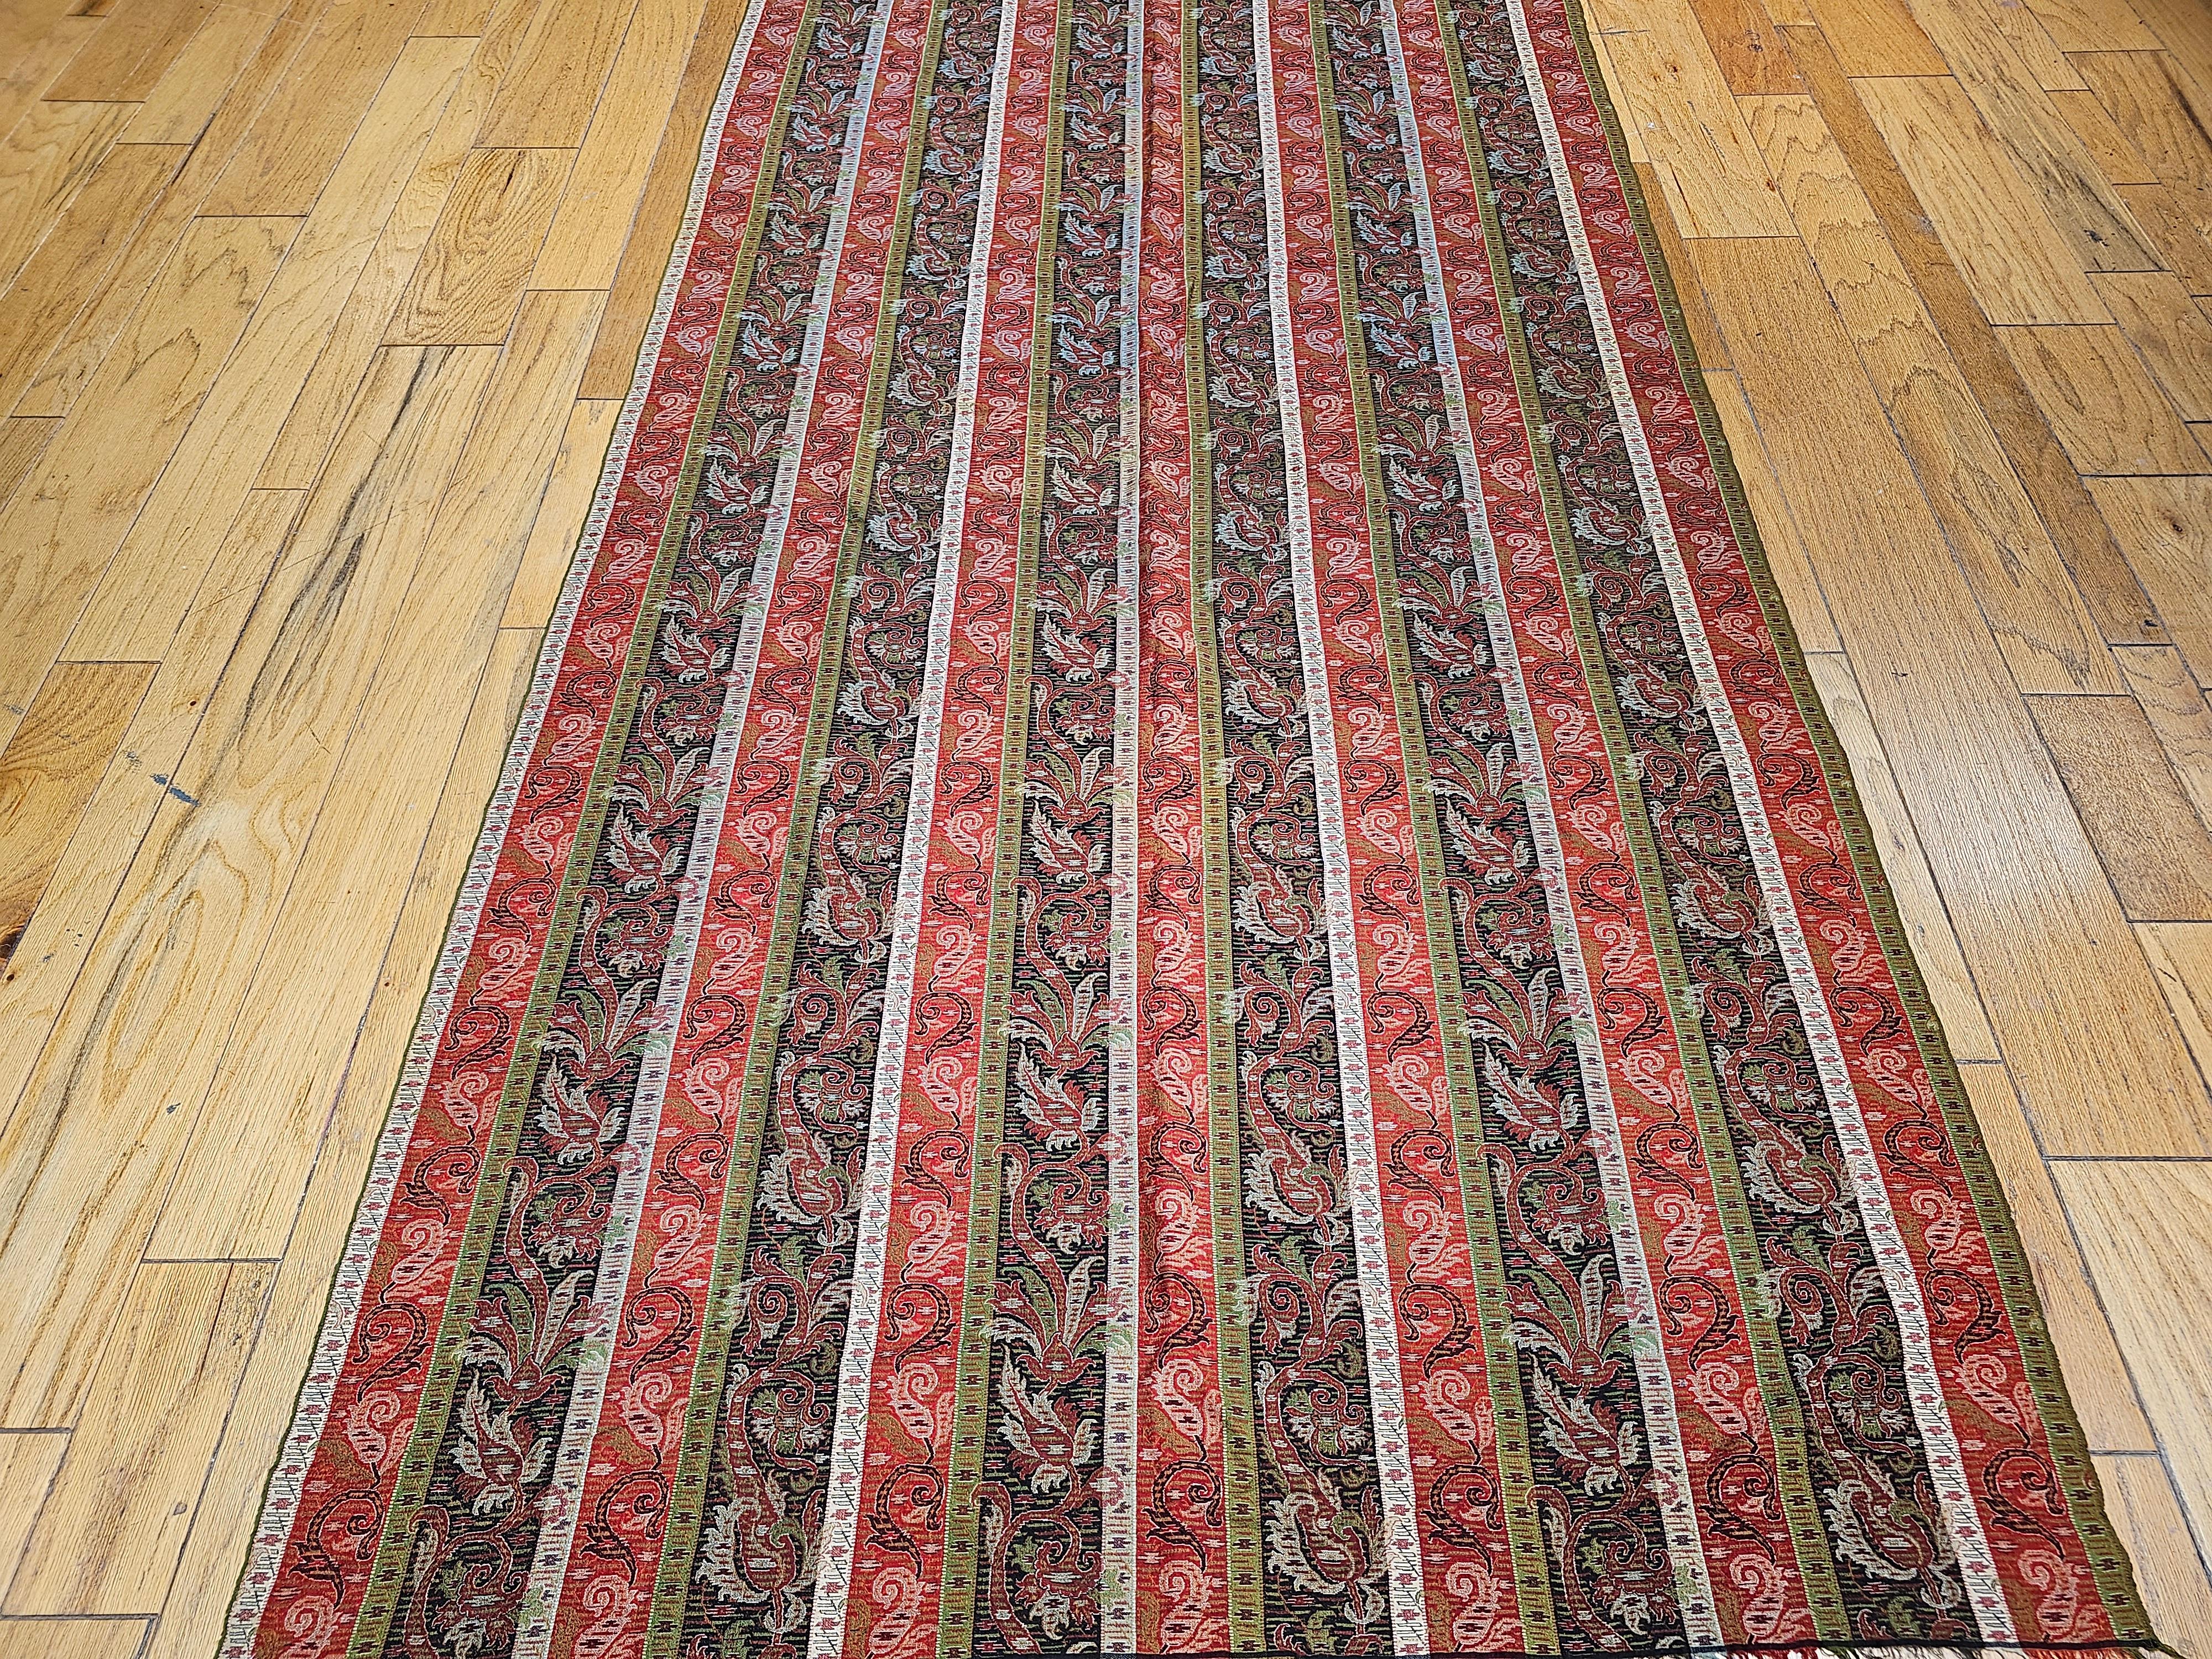 19th Century Hand-Woven Kashmiri Paisley Shawl in Brick Red, Ivory, Black, Green For Sale 4